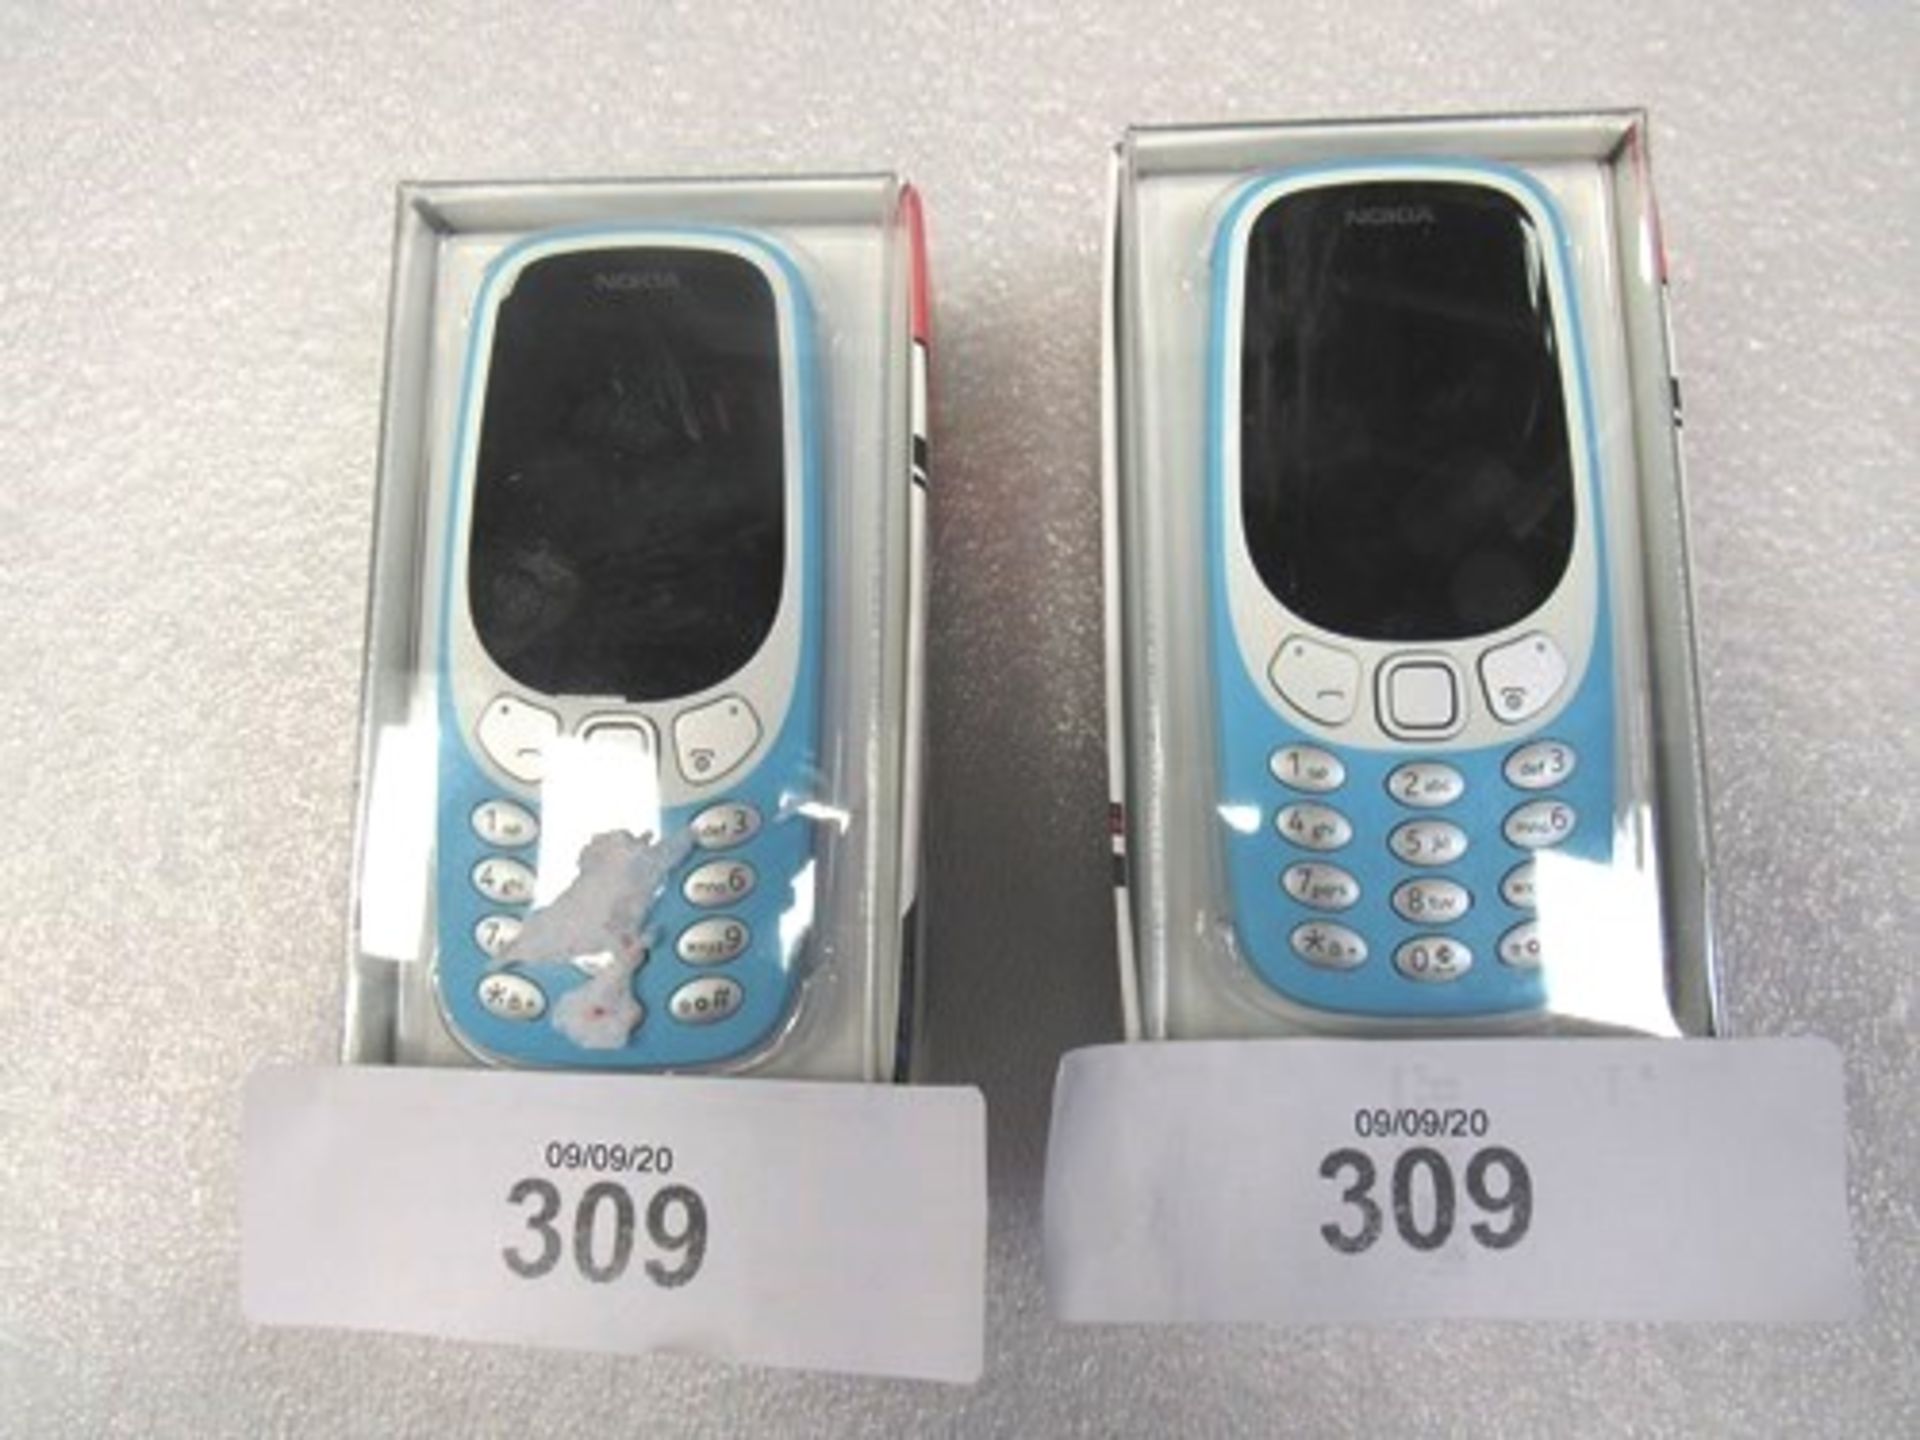 2 x Nokia 3310 3G phones, Ref: TA-1022, IMEI: 355819091042089 and 355819091042139 - Sealed new in